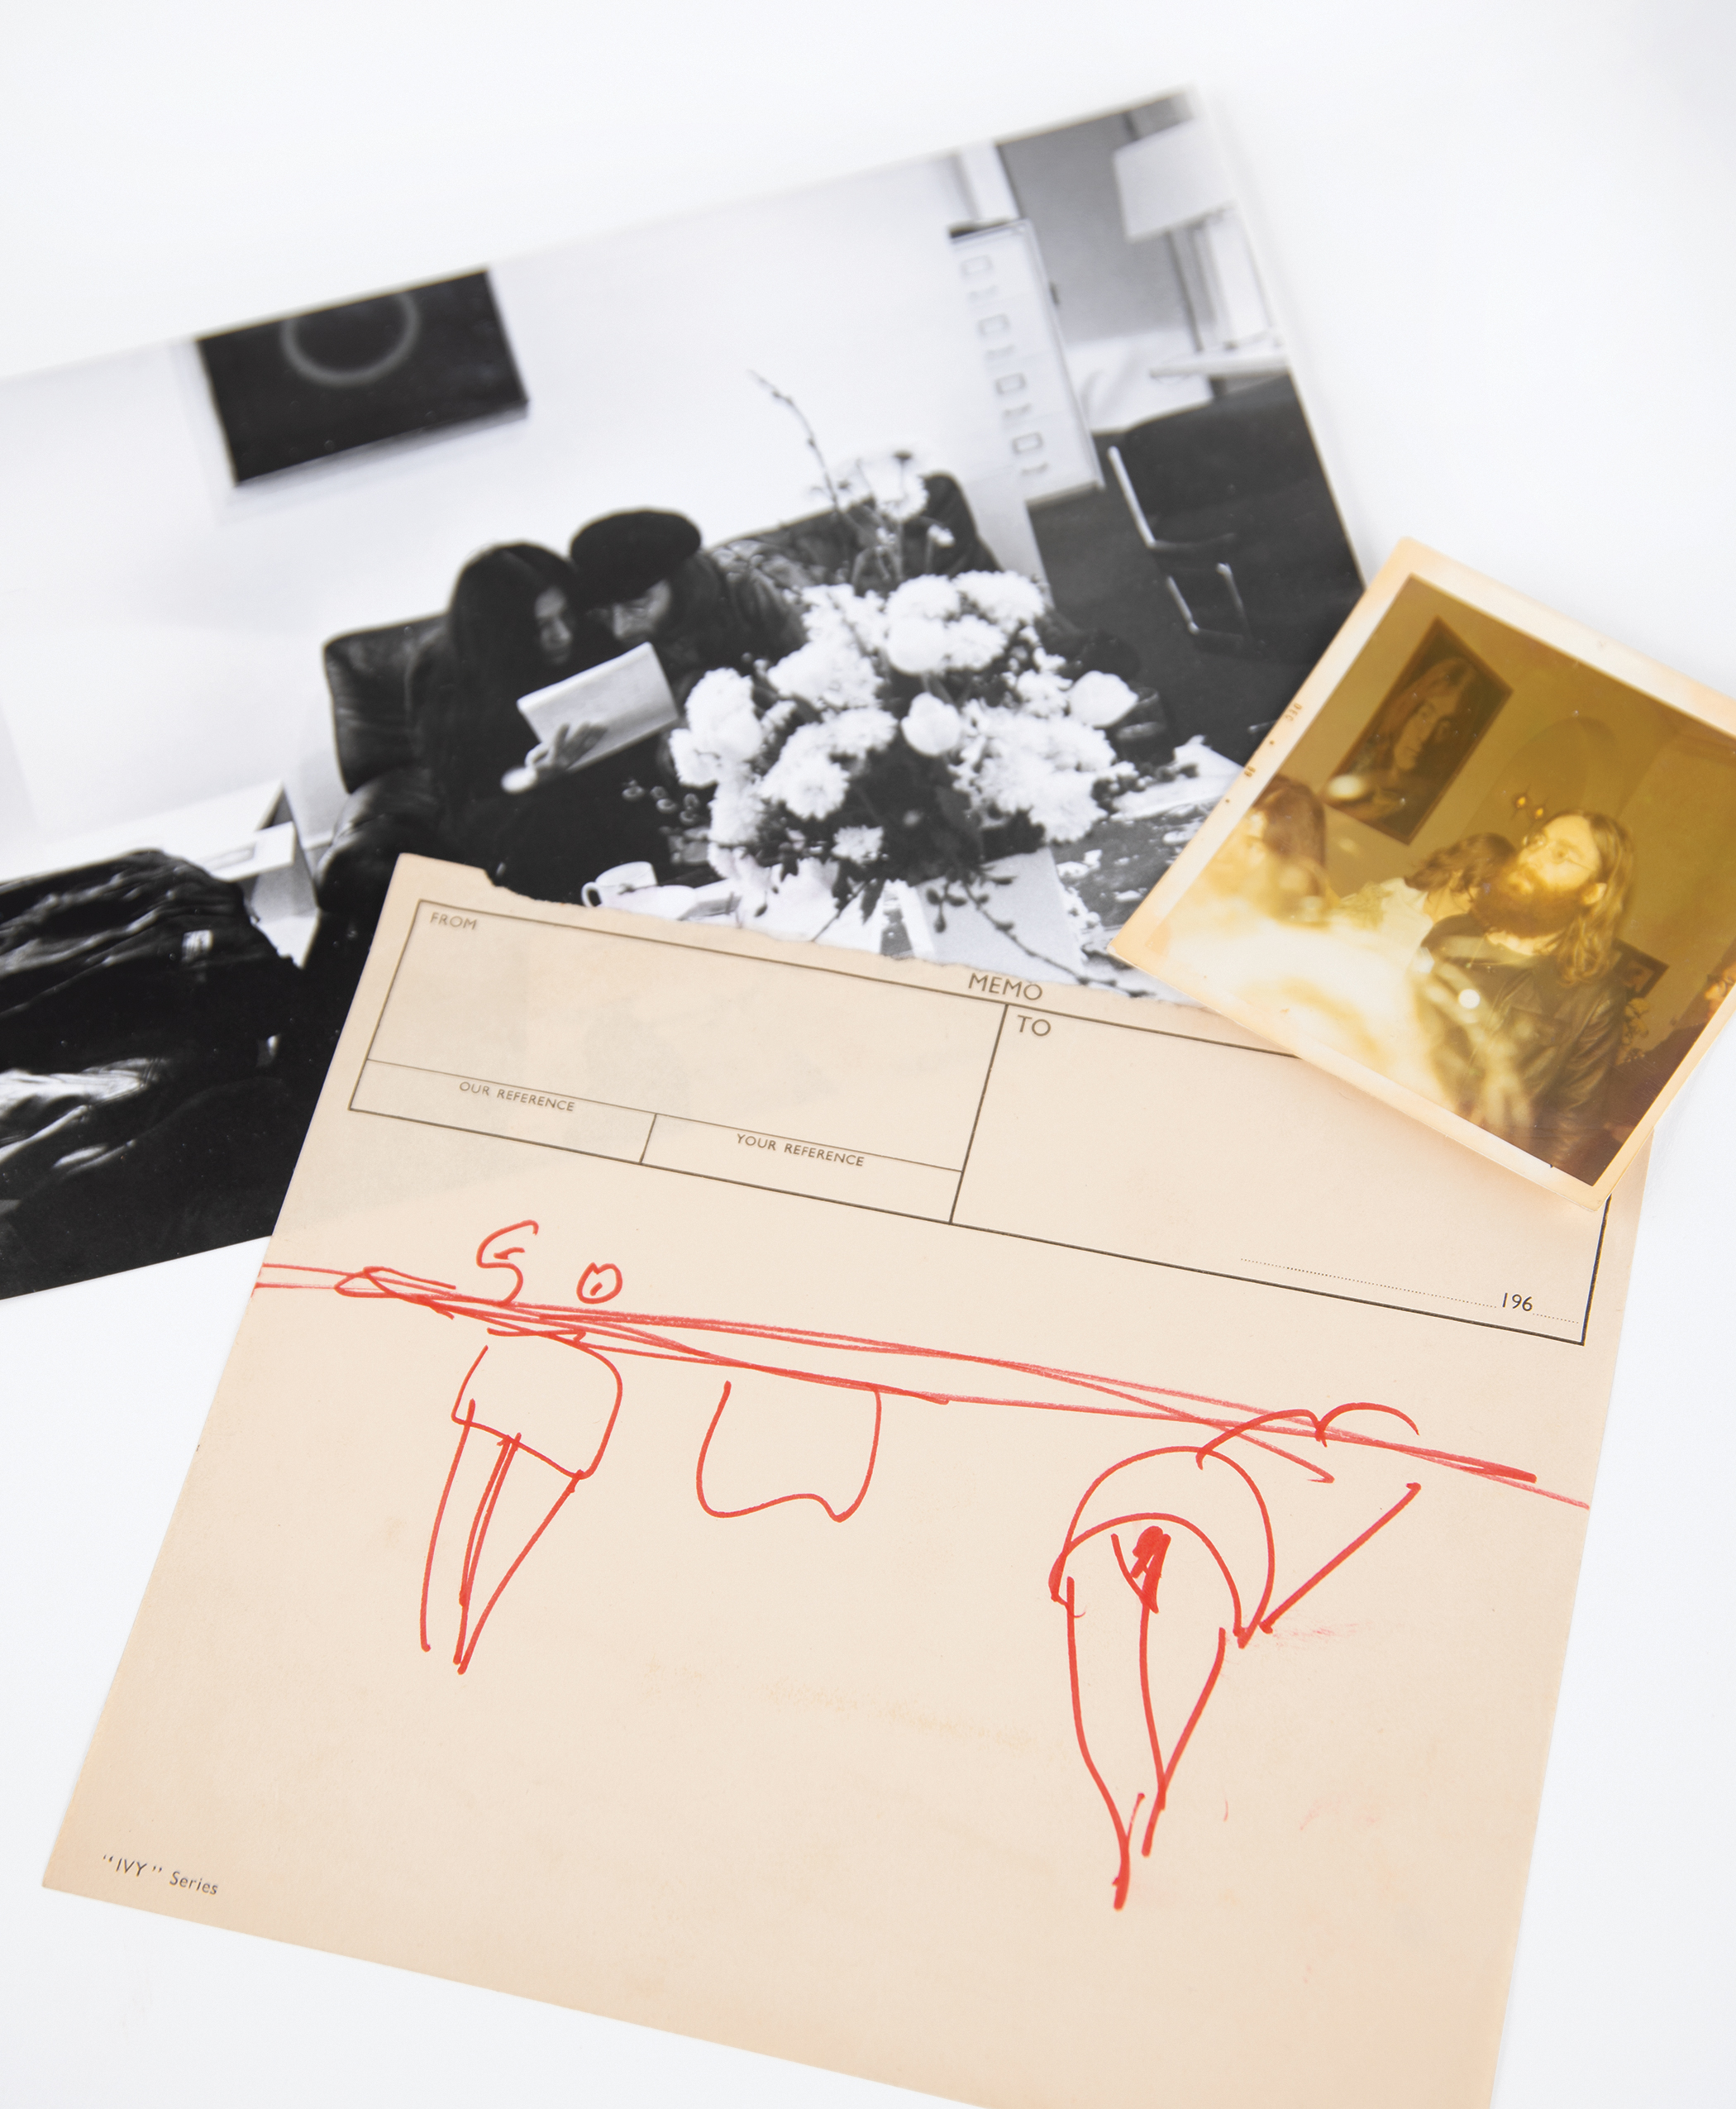 Lot #9009 John Lennon Original Sketch - Discovered at Apple's Headquarters in 1969 - With Vintage Photographs - Image 1